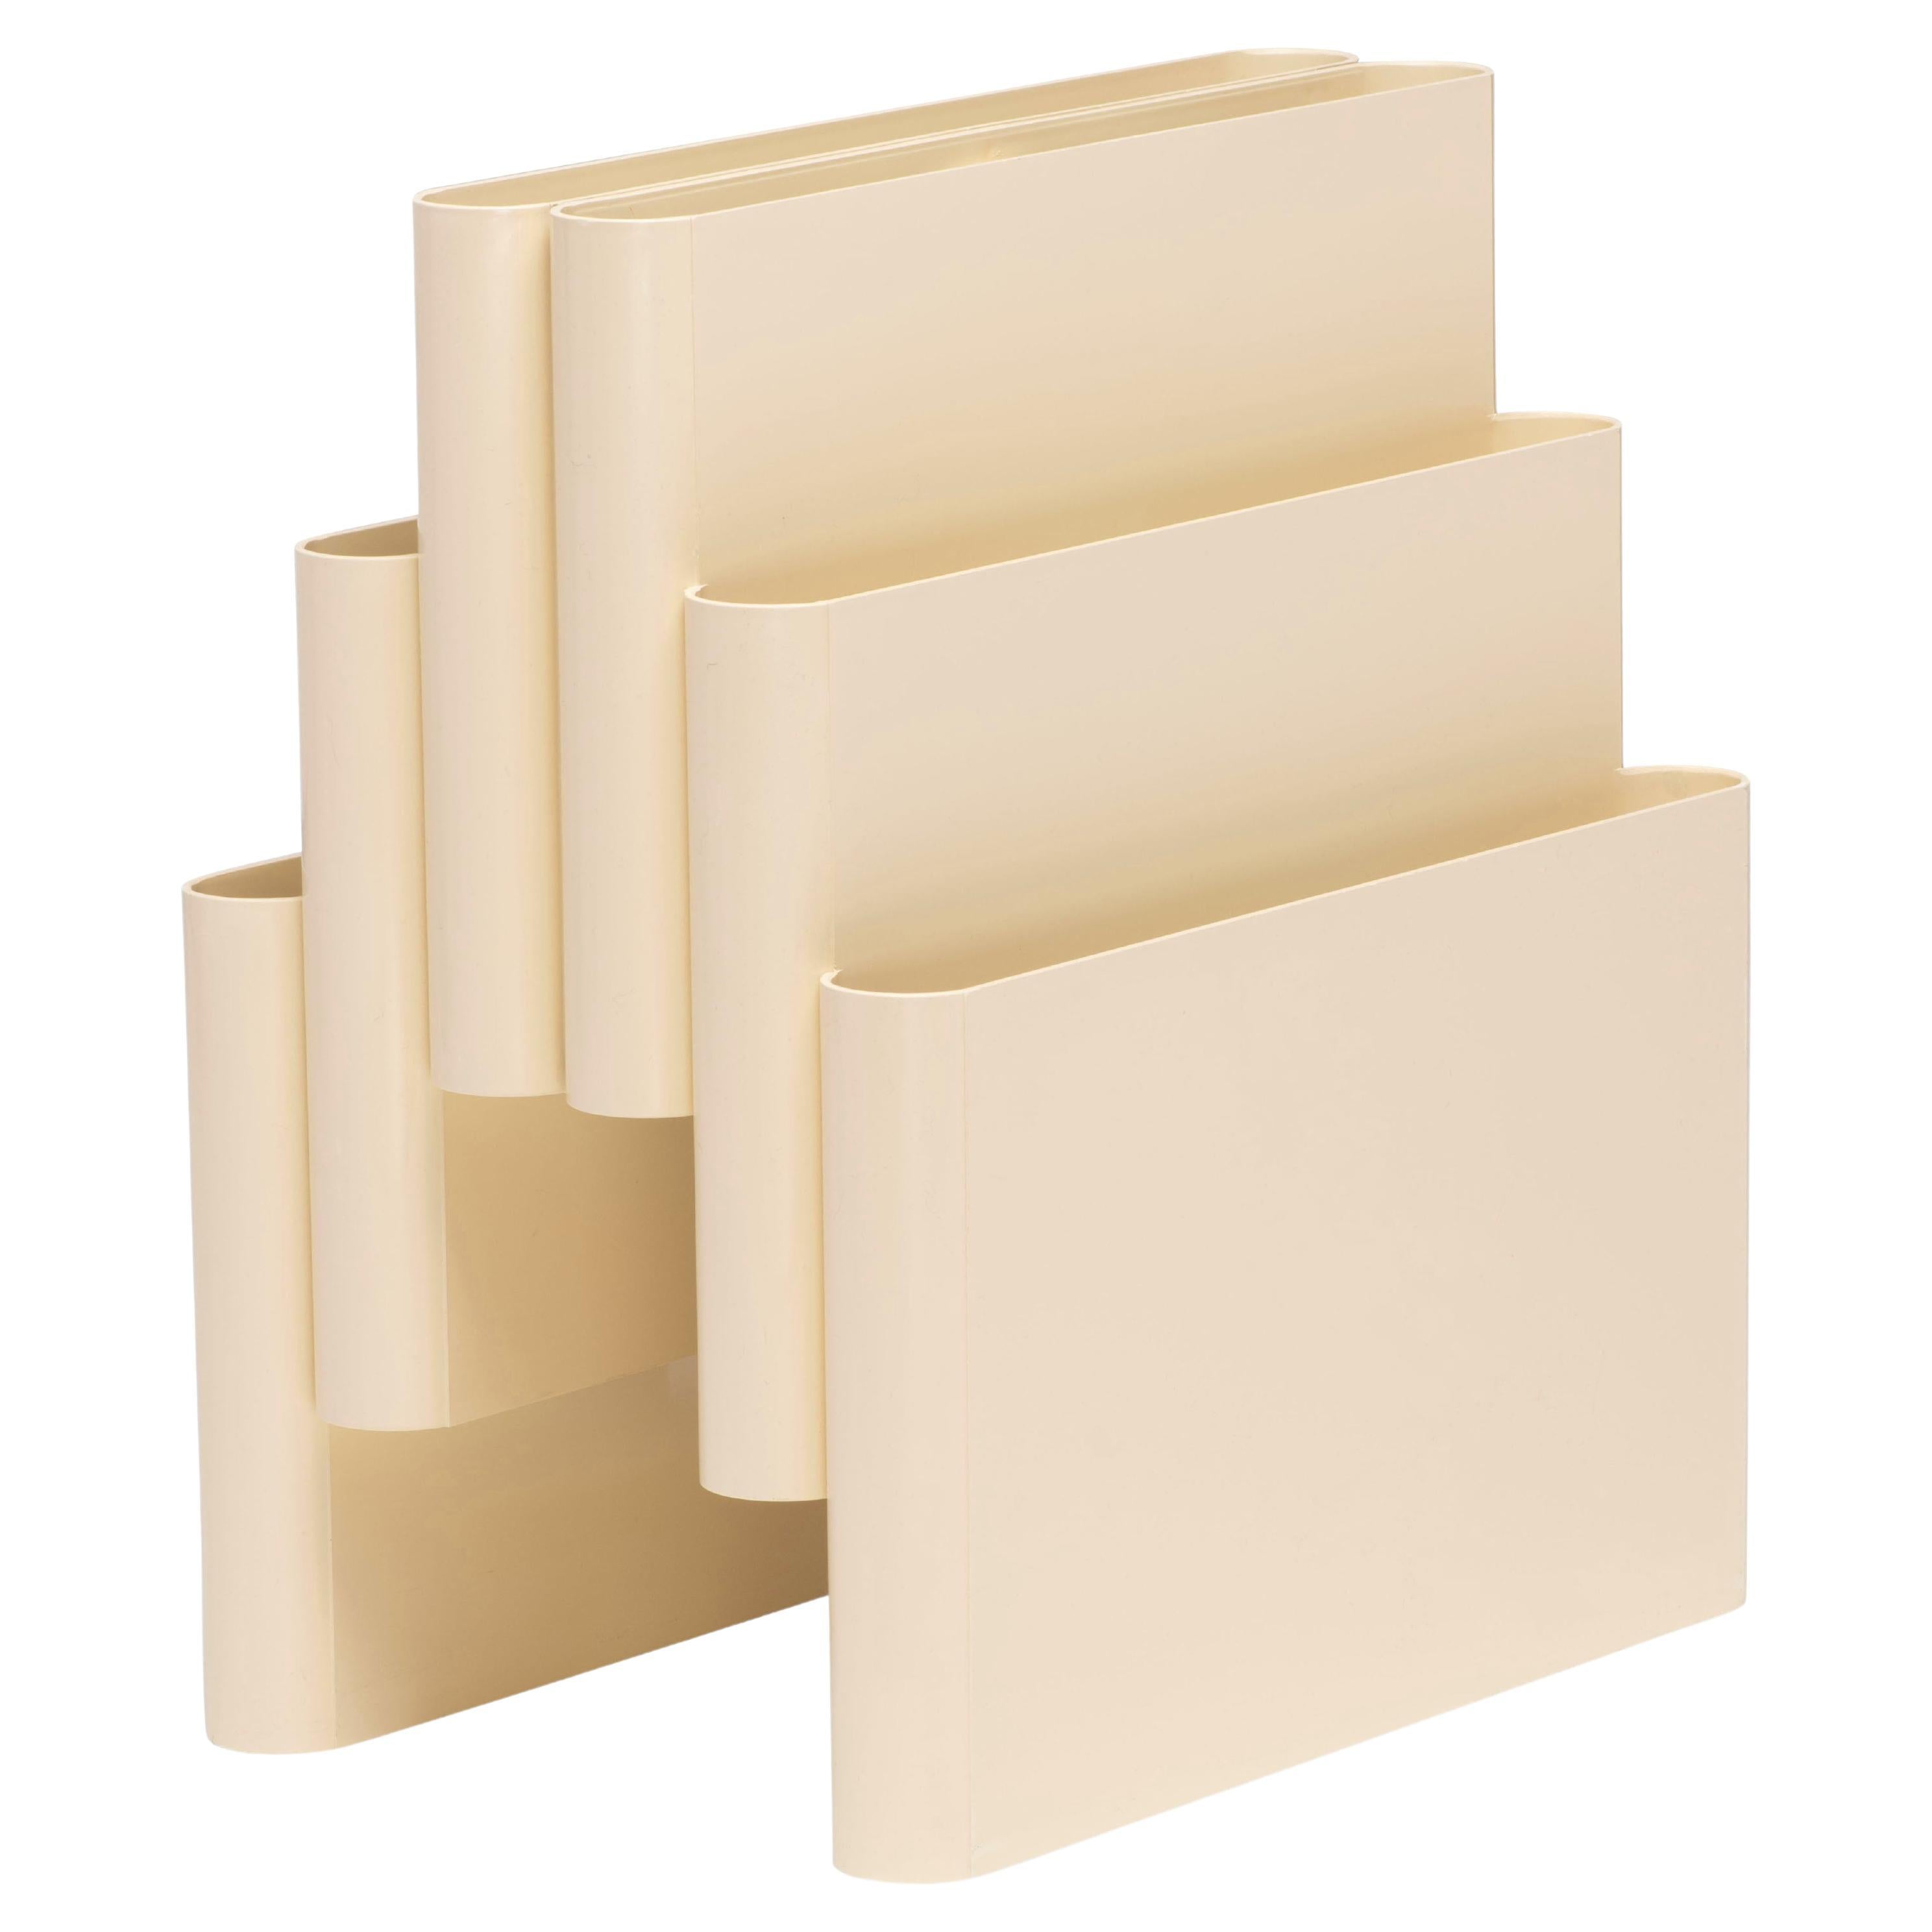 Giotto Stoppino, Beige 4675 Magazine Holder, 1972 For Sale